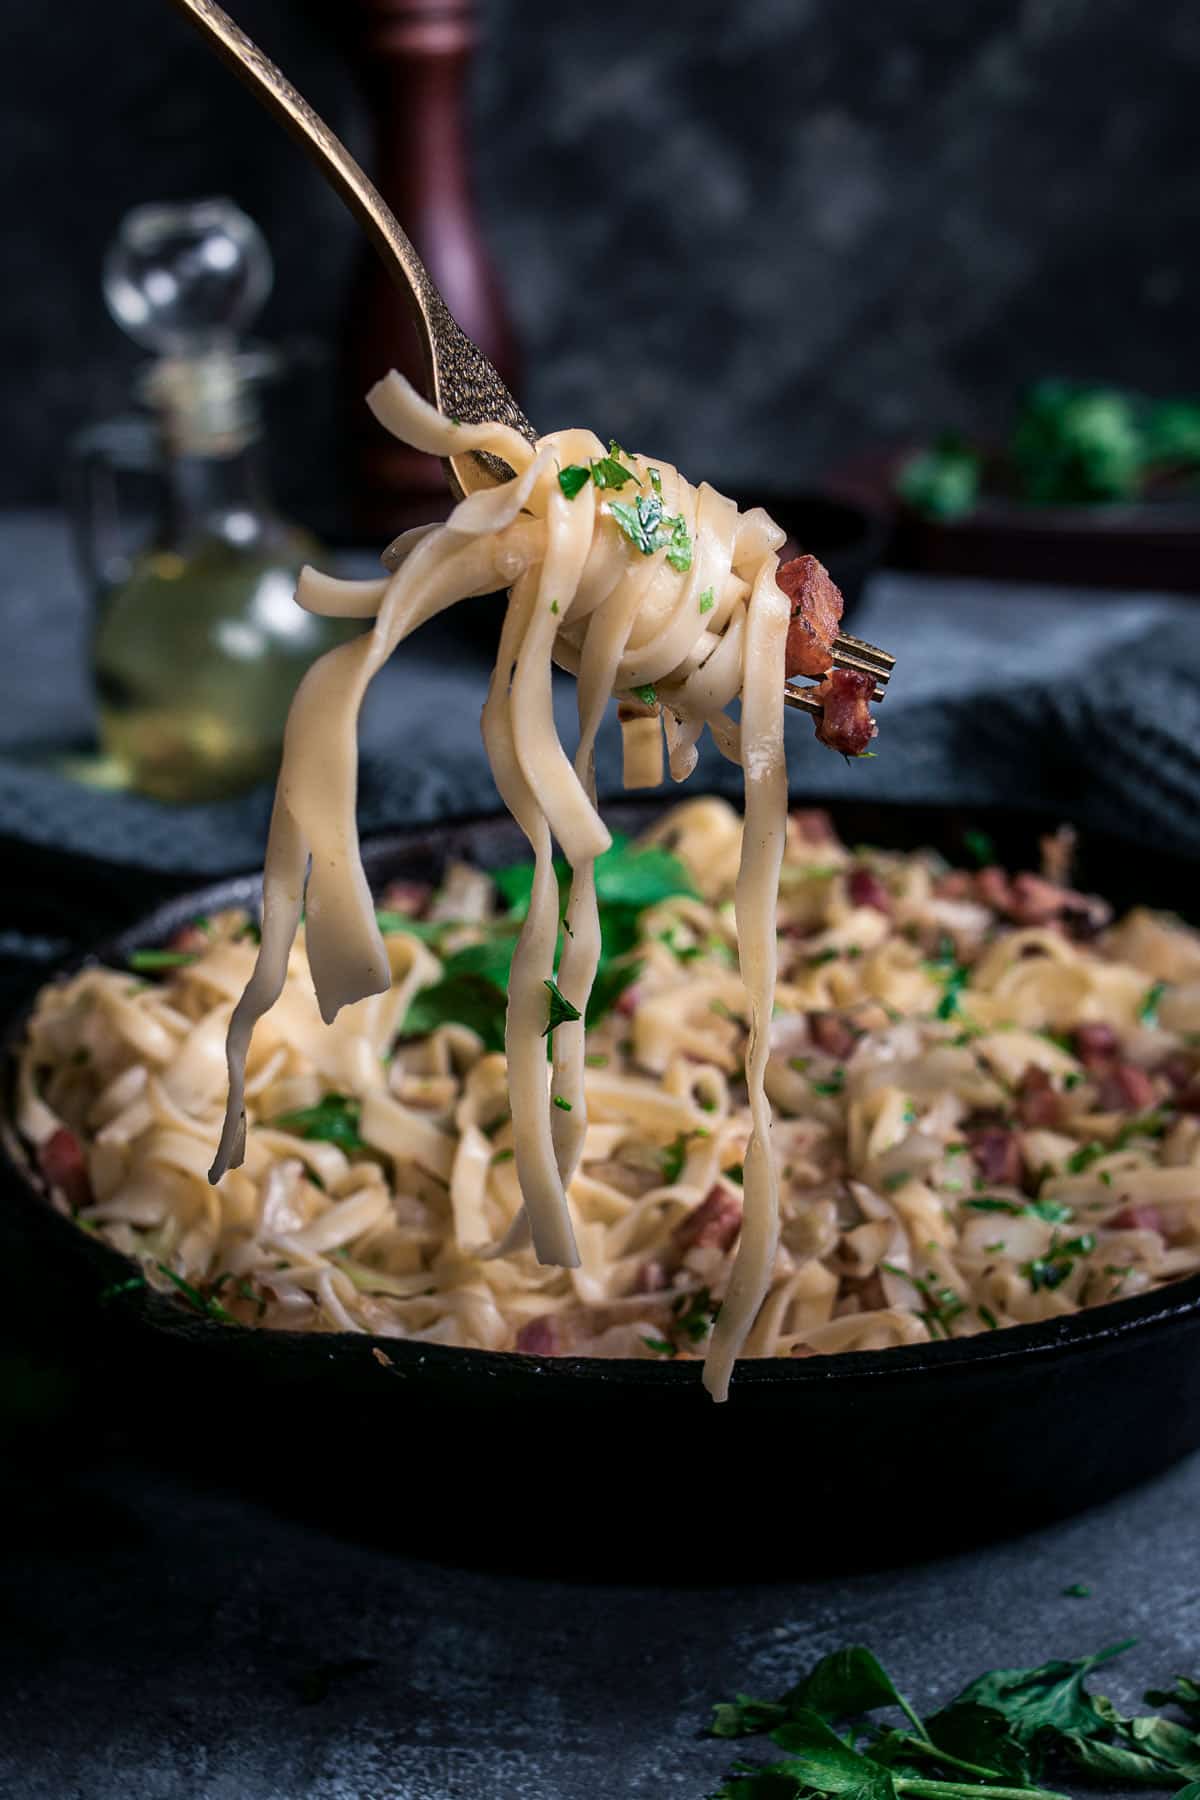 Noodles with fried cabbage and bacon wrapped around a fork.